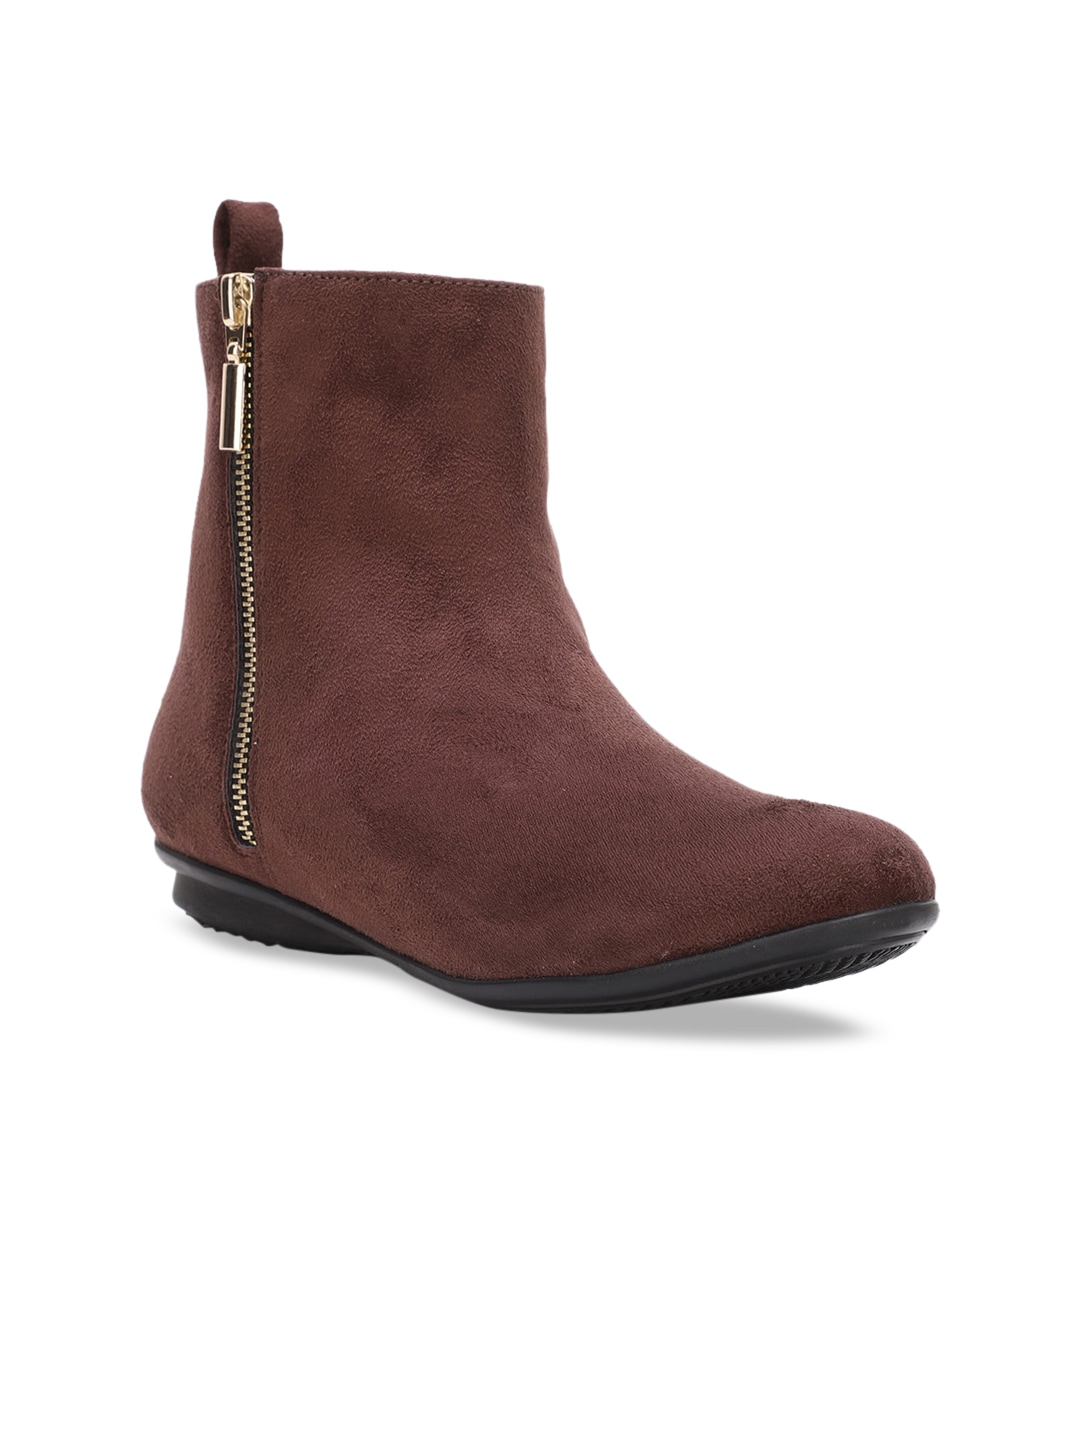 Bruno Manetti Women Brown Solid Suede High-Top Flat Boots Price in India